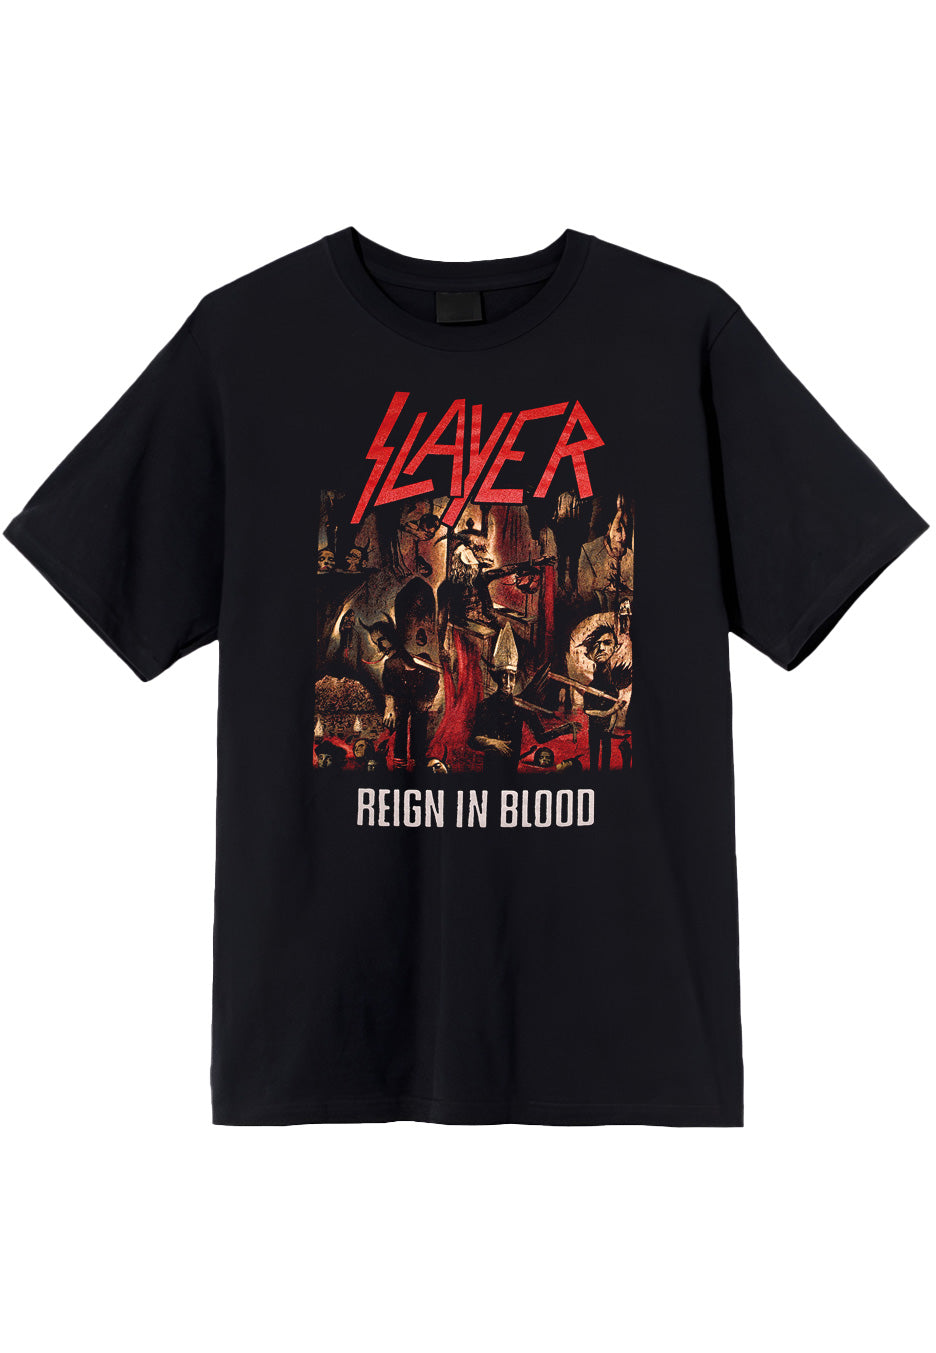 Slayer - Reign In Blood - T-Shirt